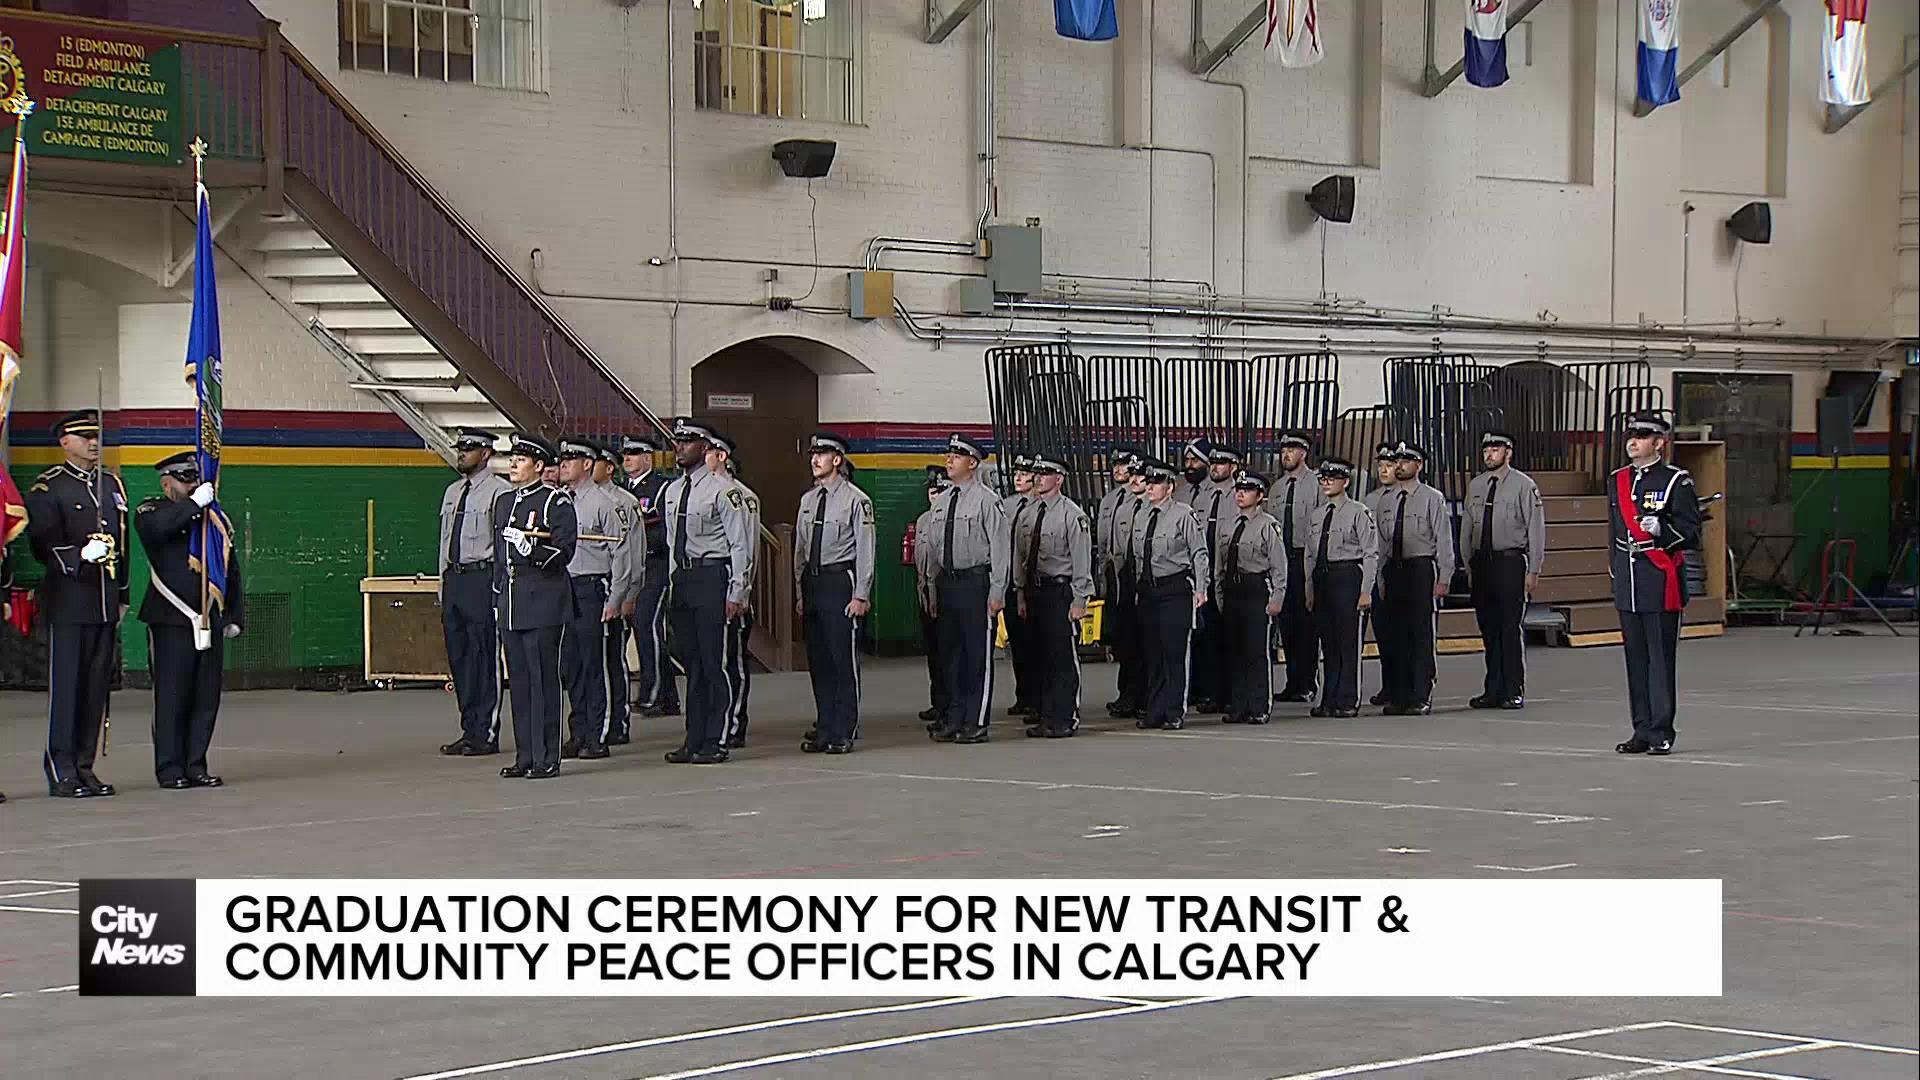 Graduation ceremony for new transit & community peace officers in Calgary